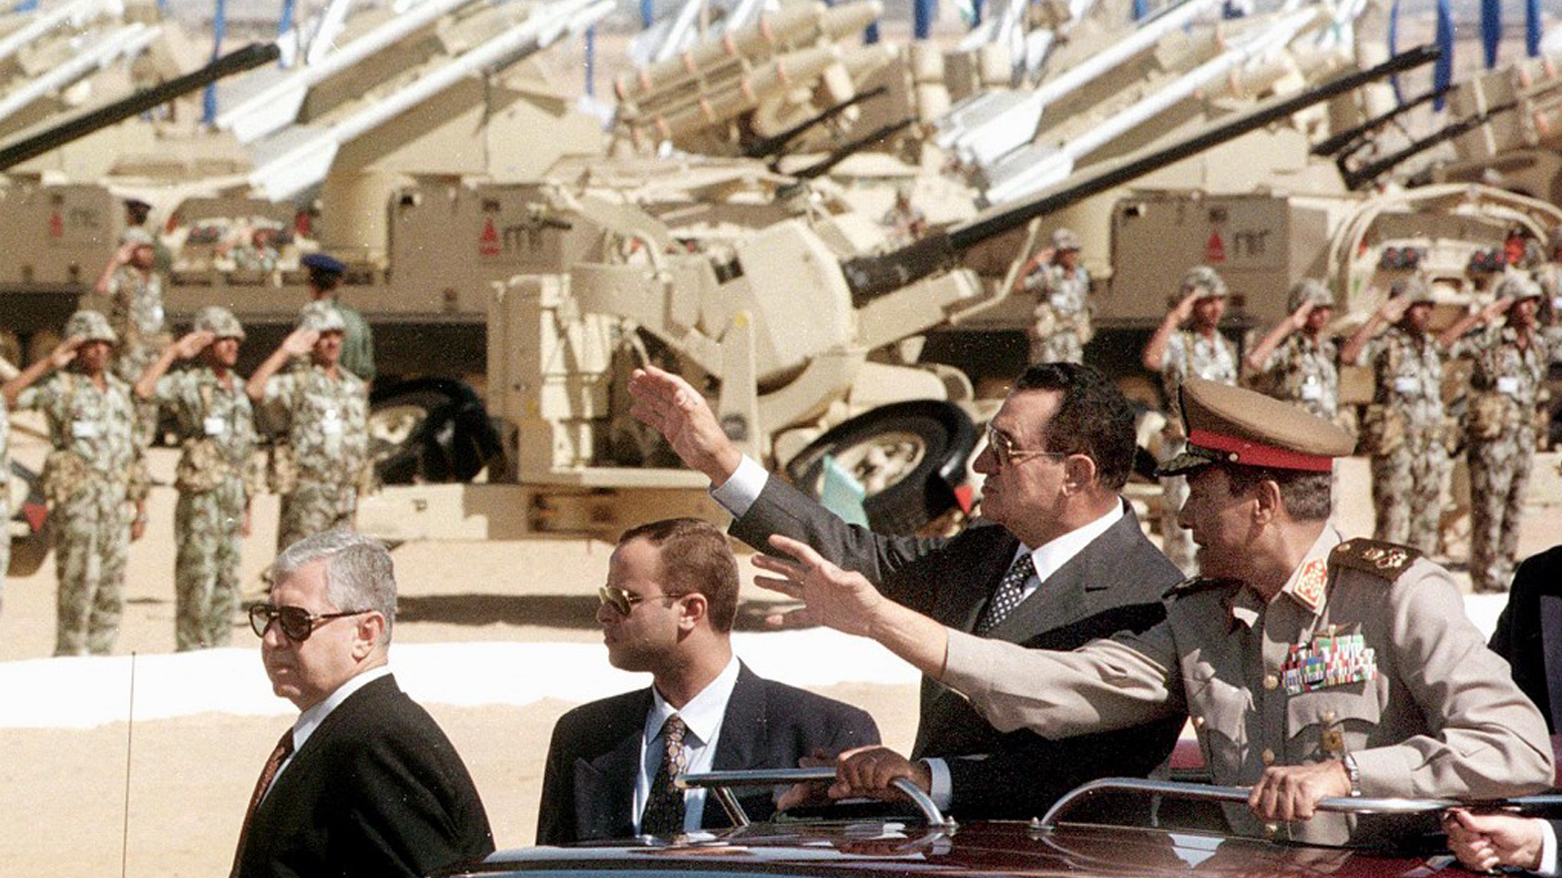 Egypt's President Hosni Mubarak (2nd-R) review Egyptian soldiers during a military parade outside Cairo to mark the 25th anniversary of the 1973 Arab-Israeli war, Oct. 6, 1998. (Photo: Amr Nabil/AFP)